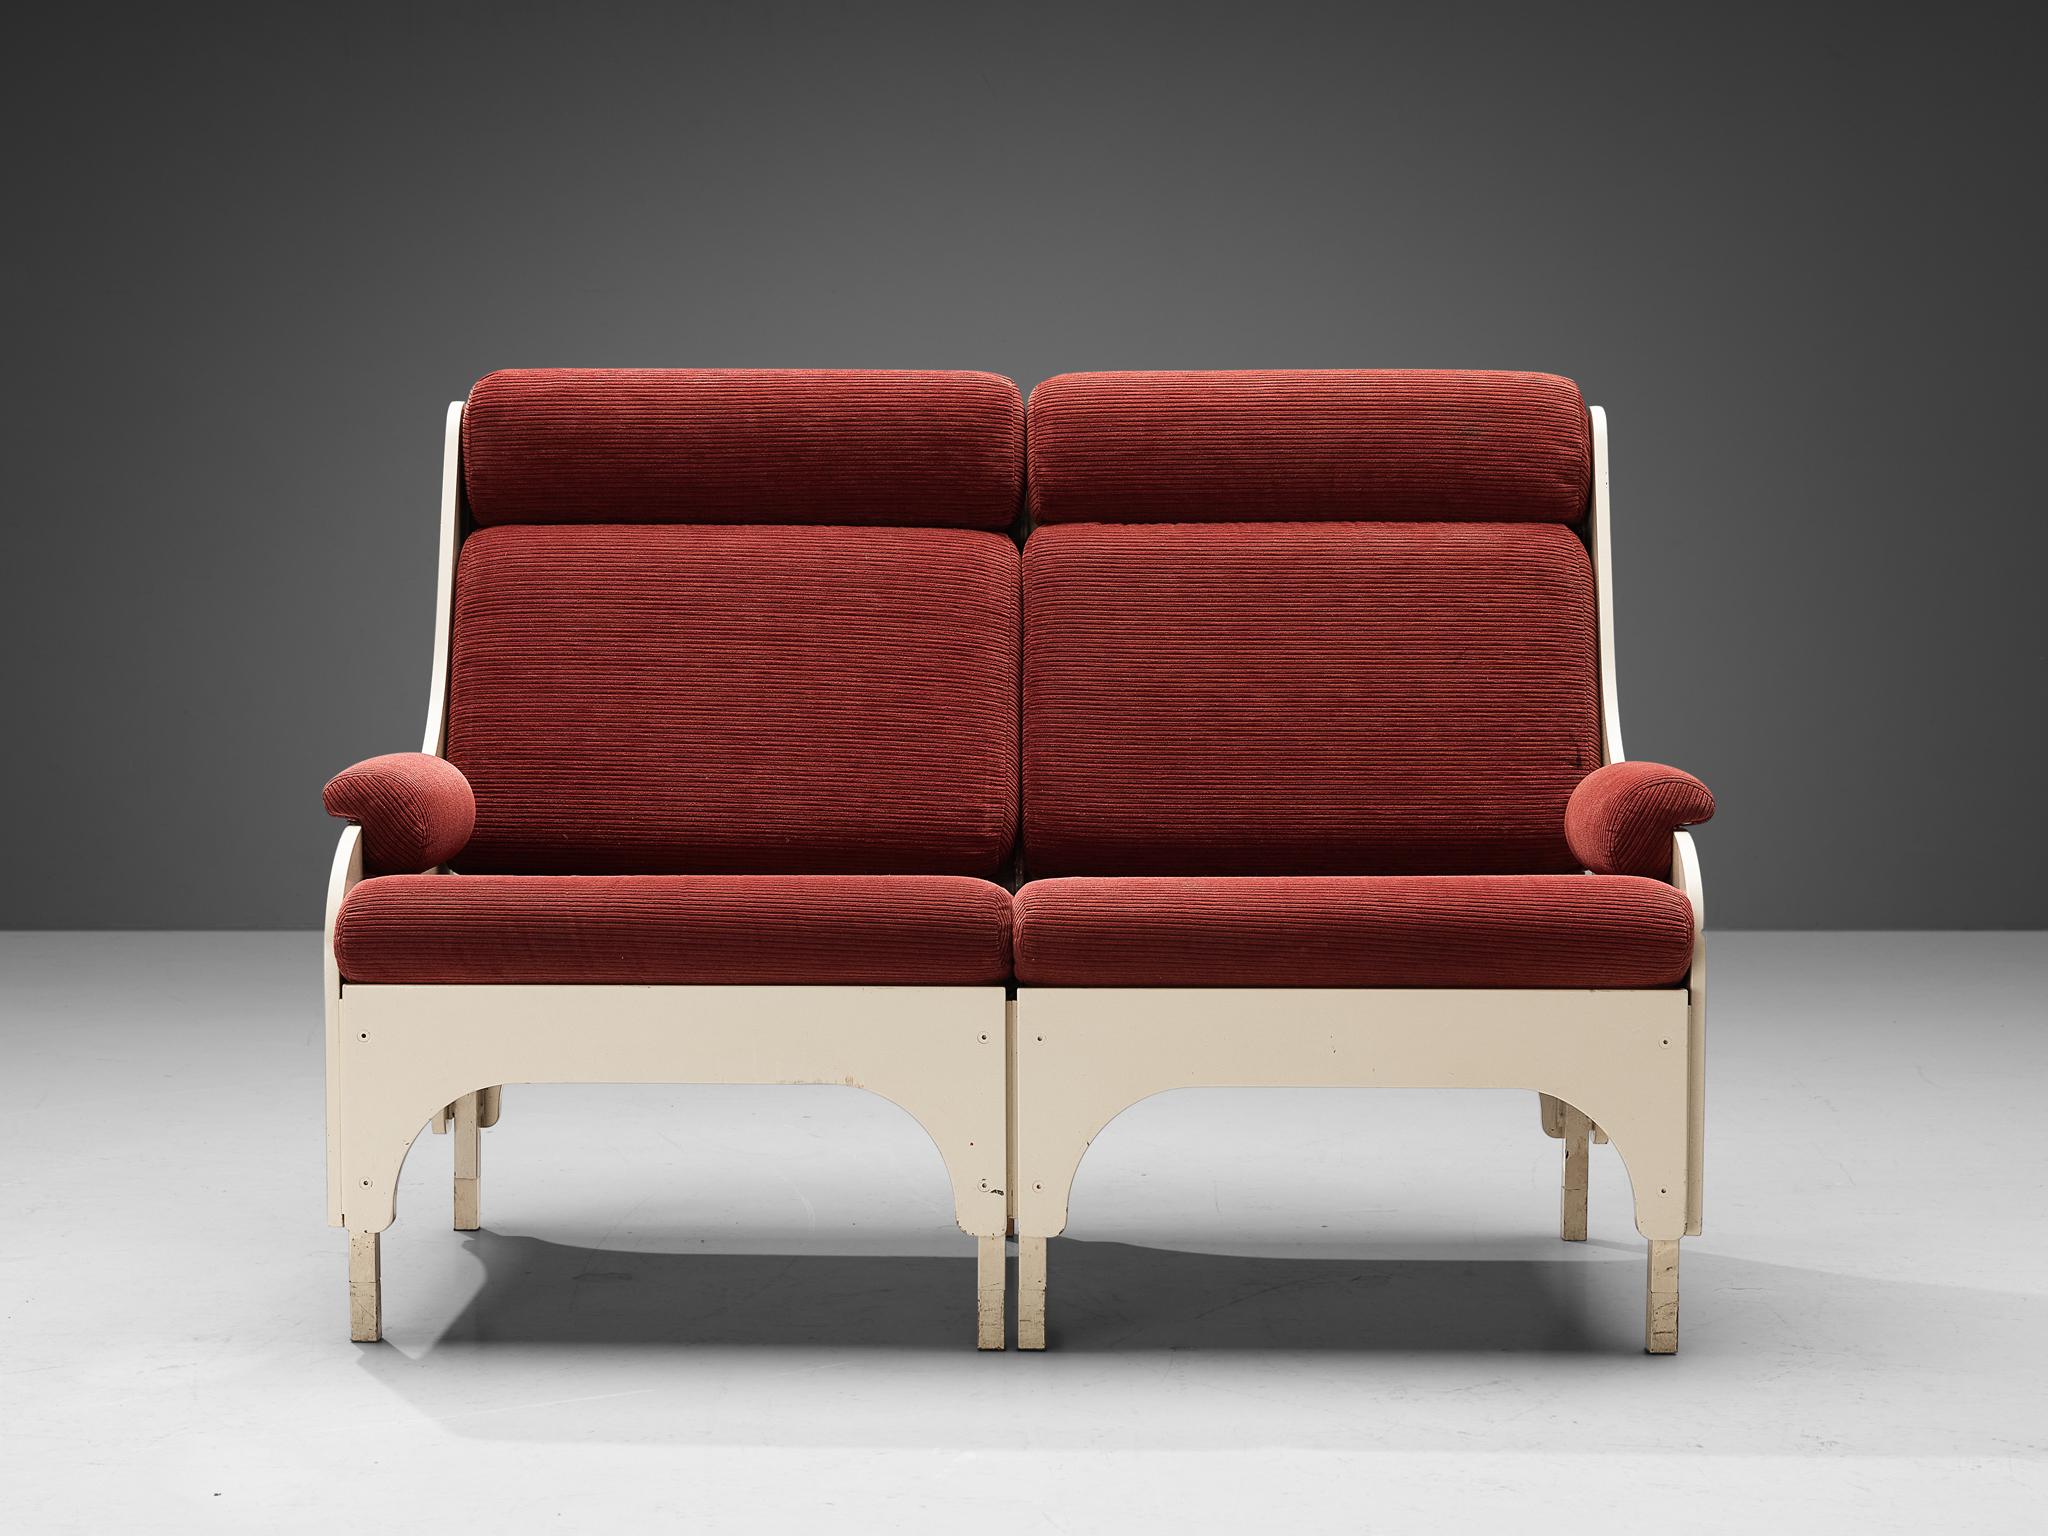 Lacquered Dutch Two Seat Sofa in Burgundy Red Upholstery